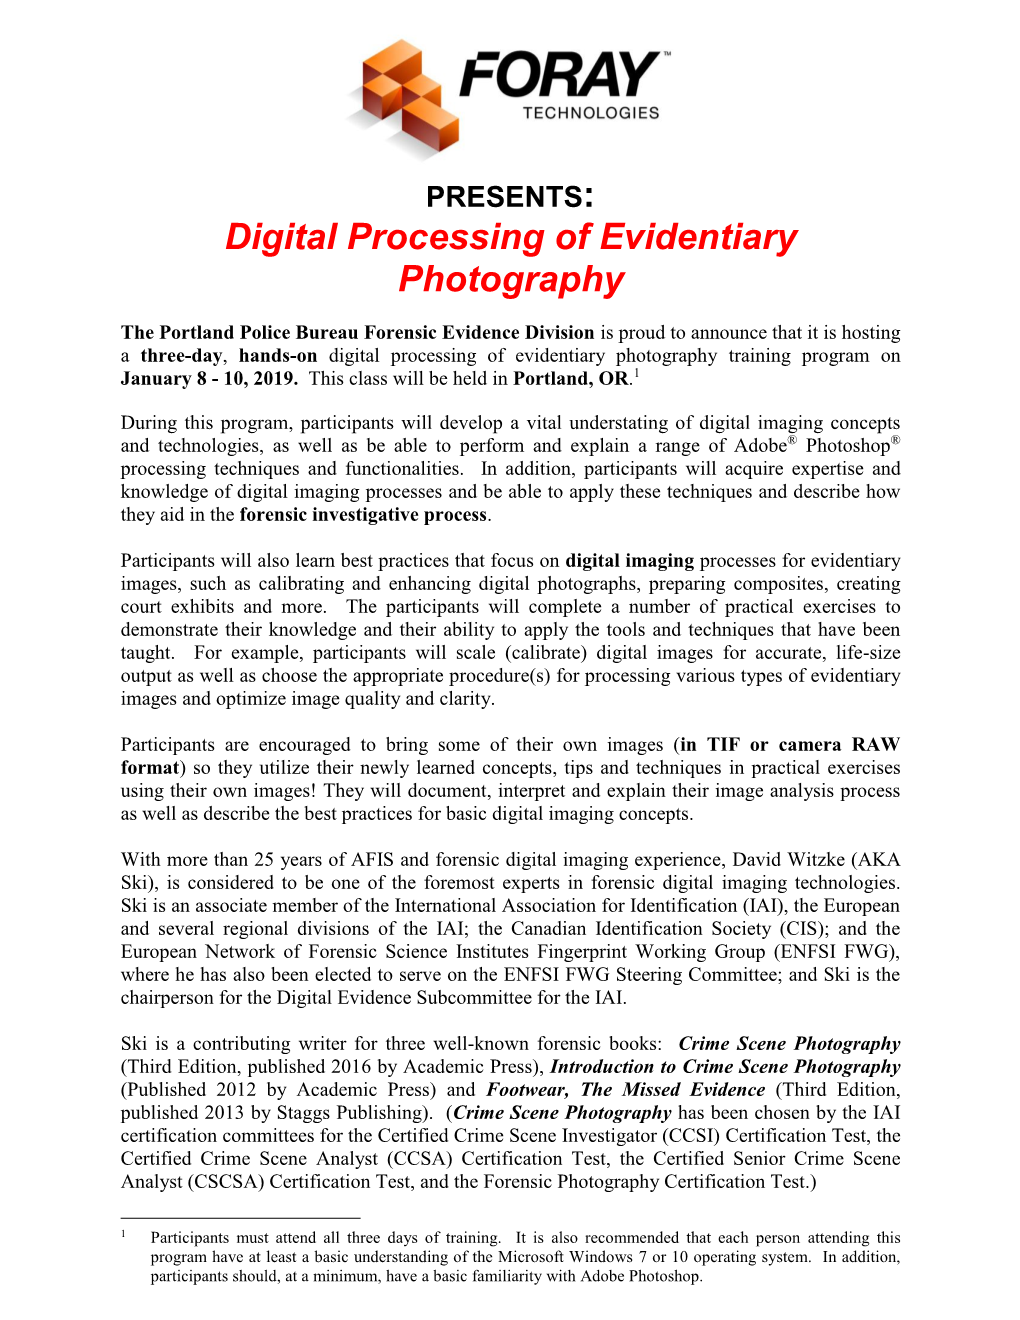 Digital Processing of Evidentiary Photography